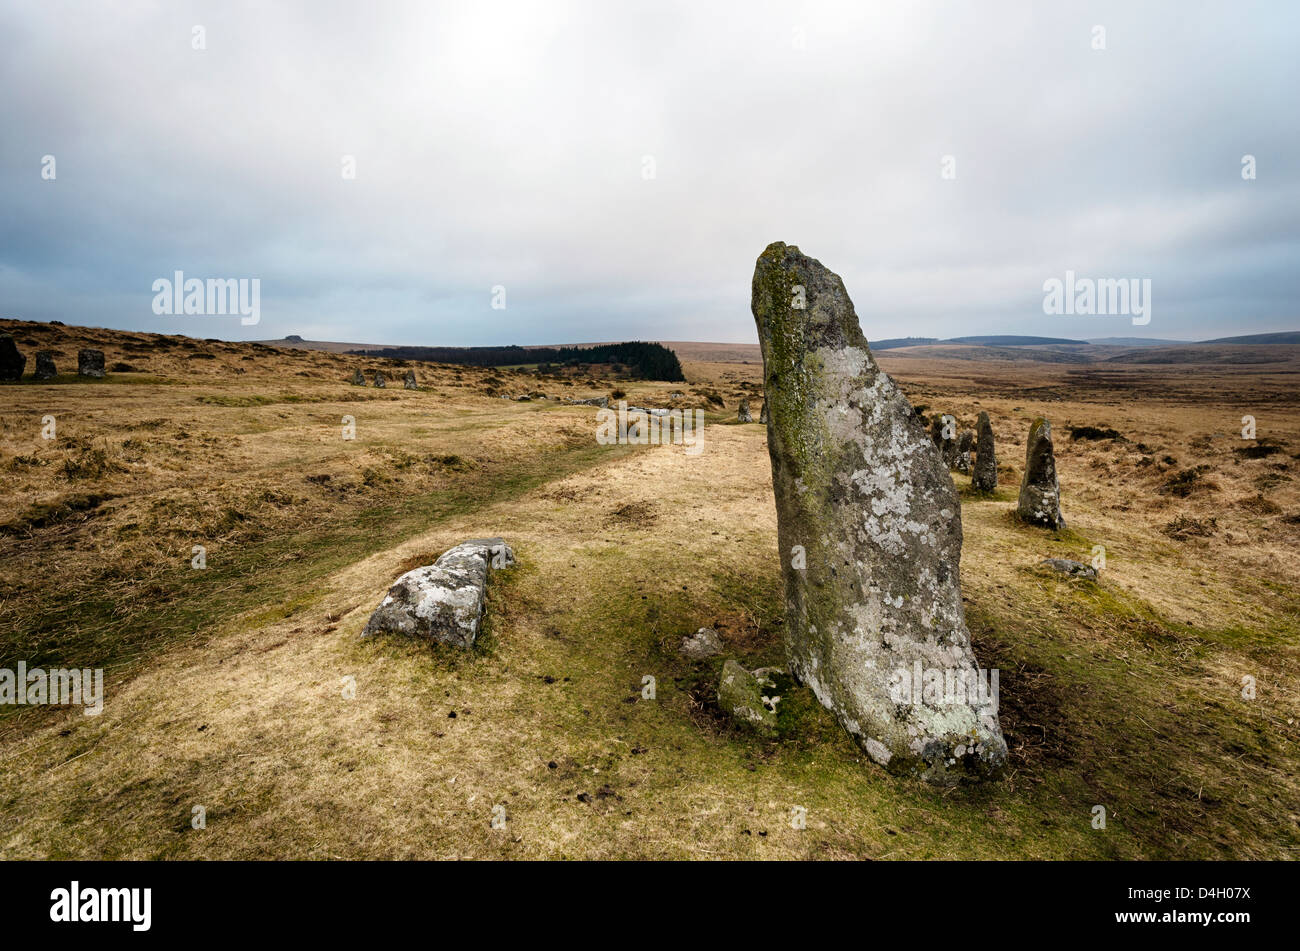 Standing stones at Scorhill stone circle on Dartmoor, also known as Gidleigh Stone Circle or Steep Hill Stone Circle. Stock Photo